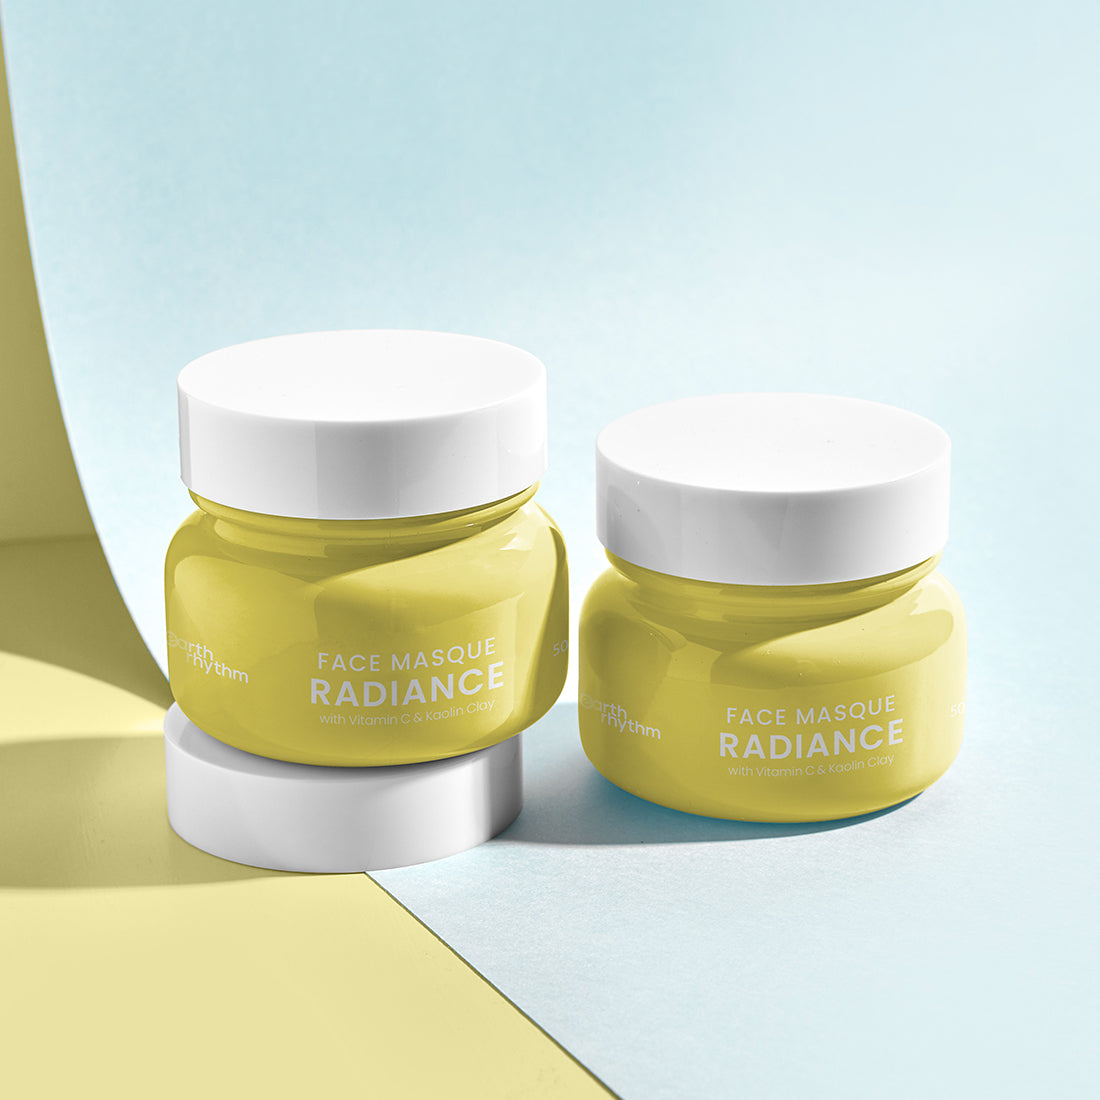 RADIANCE FACE MASQUE WITH VITAMIN C & KAOLIN CLAY